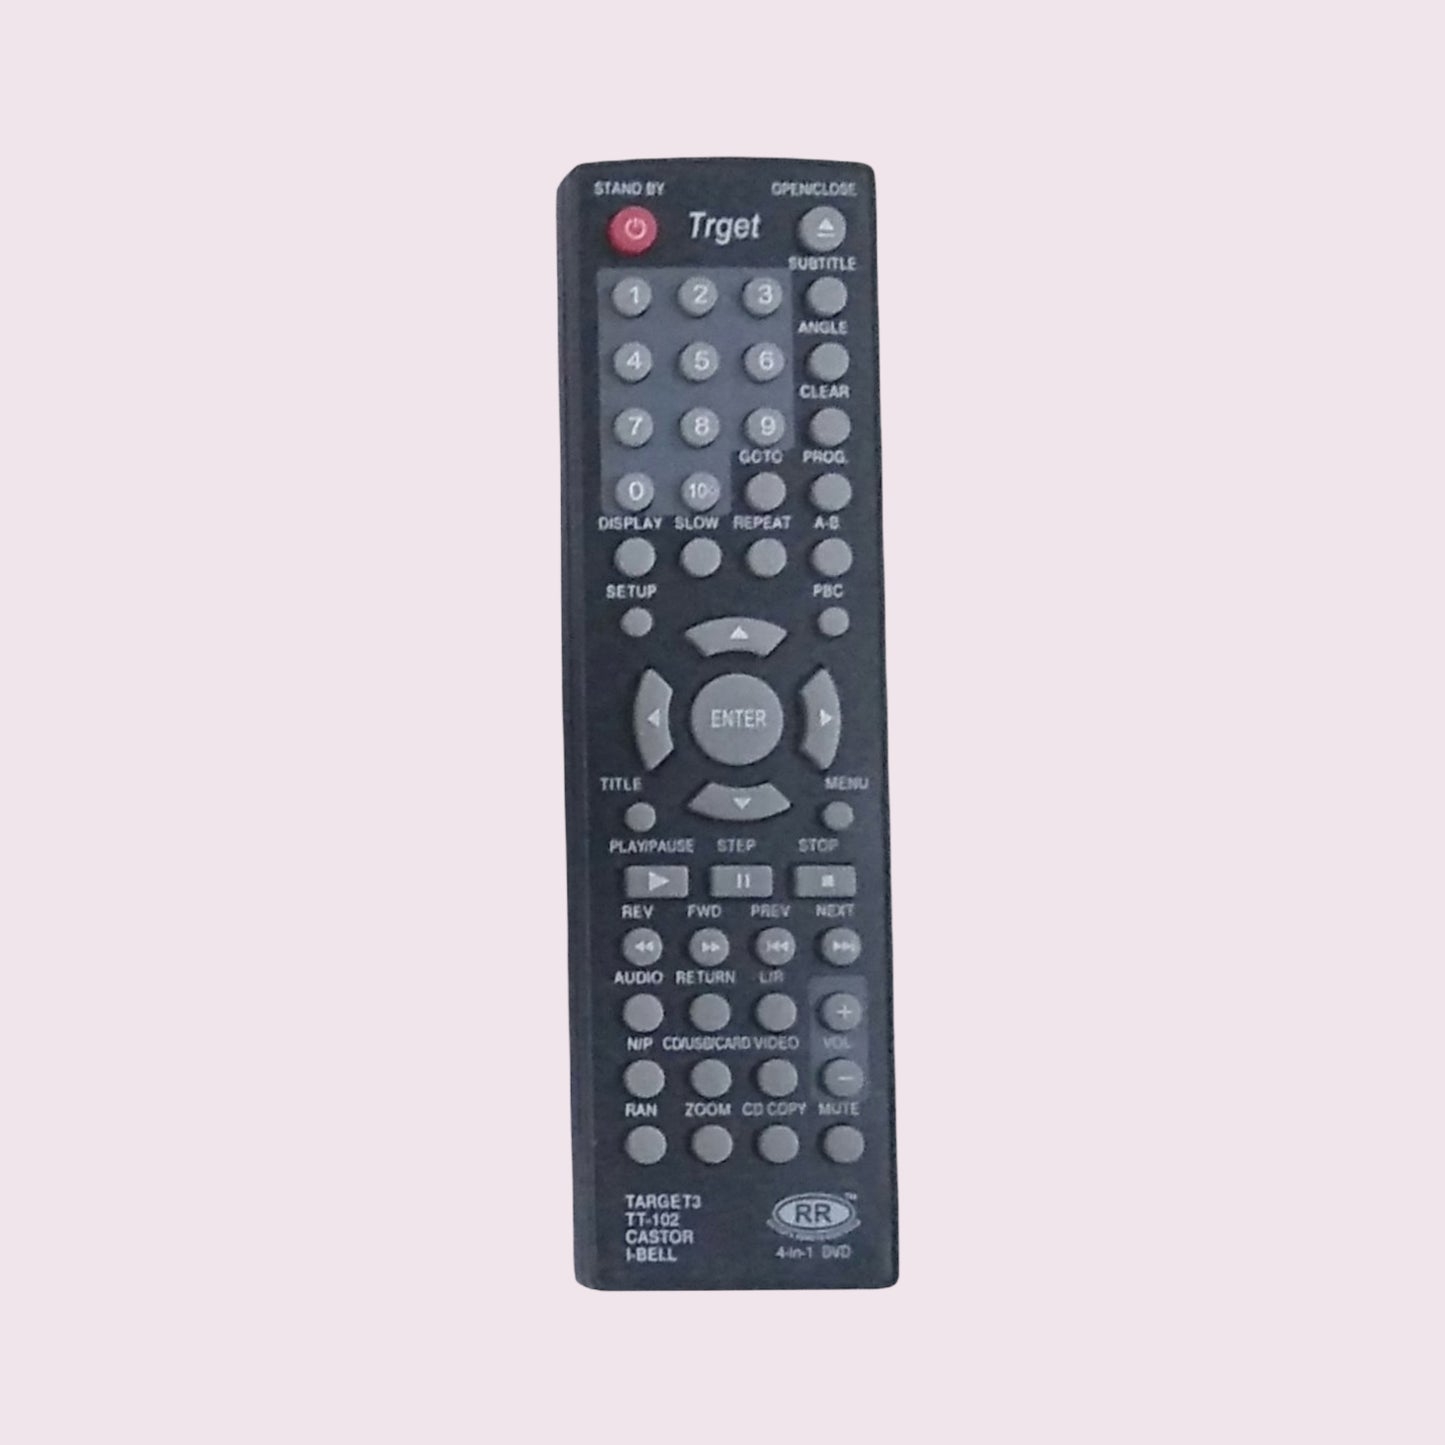 Target,  Taotronics, Caster, I Ball 4 in 1 dvd player remote control (DV30)